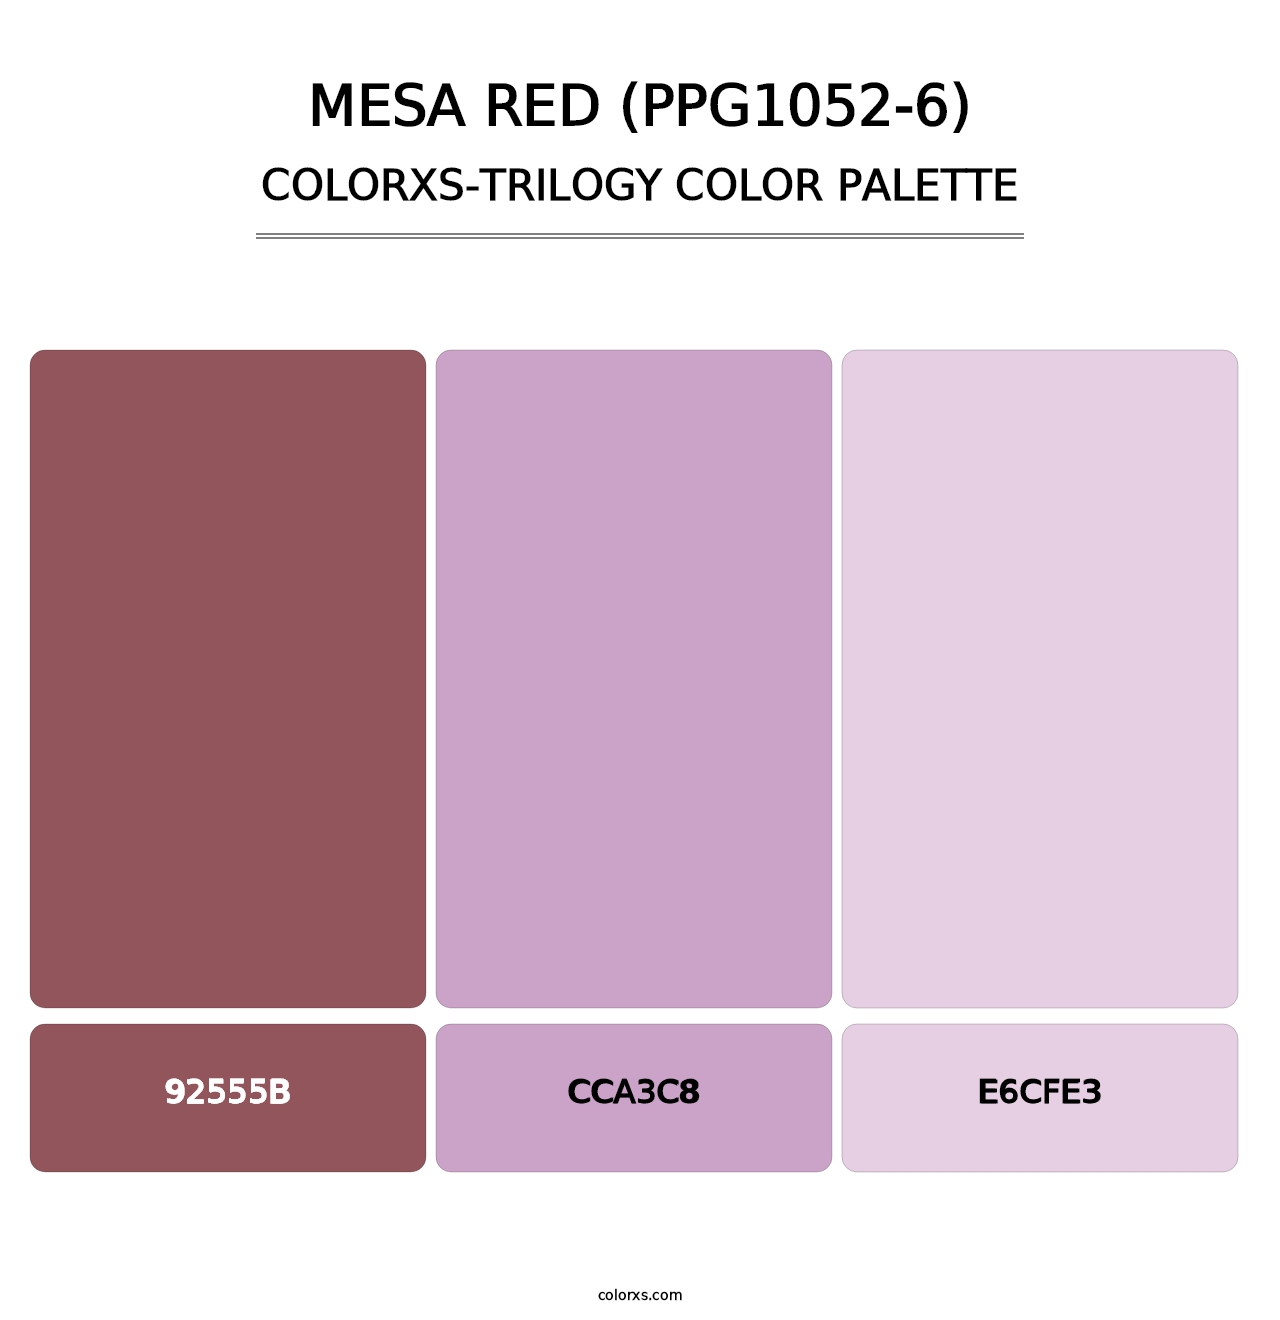 Mesa Red (PPG1052-6) - Colorxs Trilogy Palette